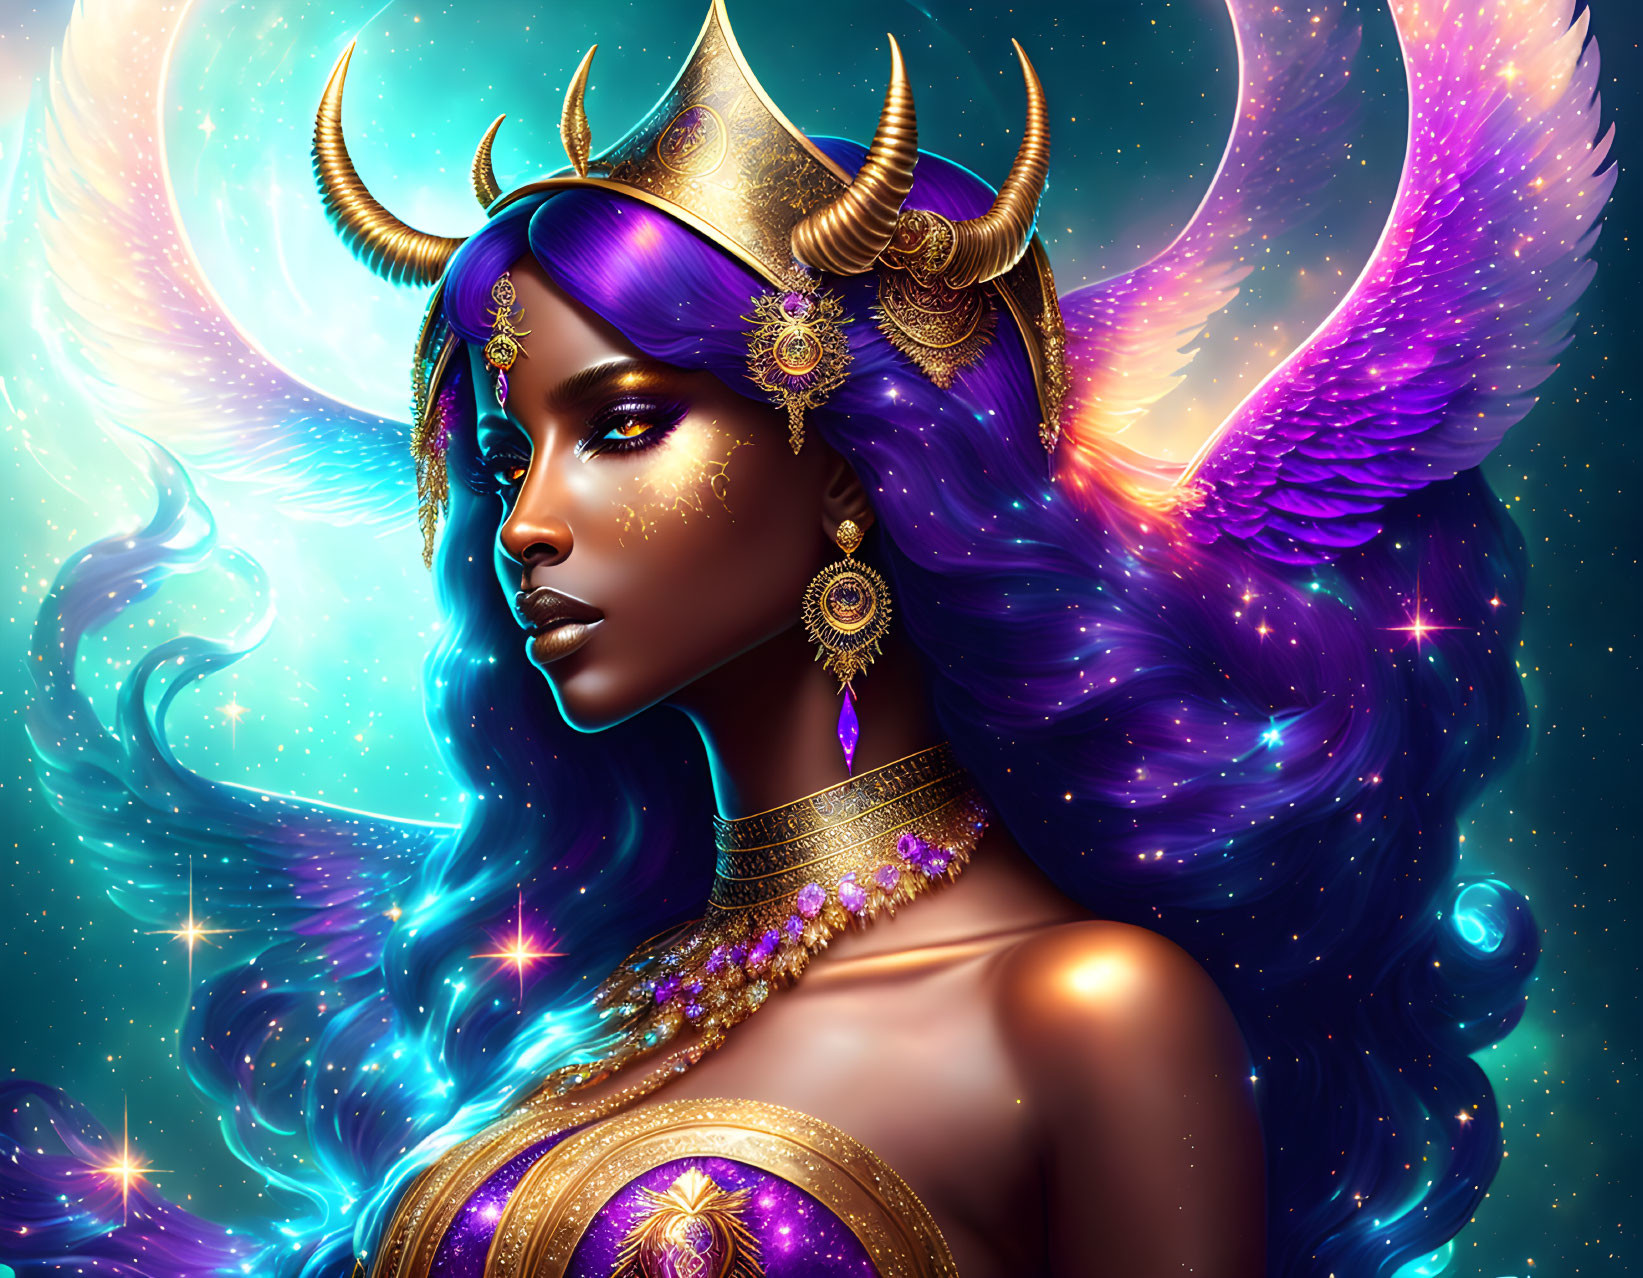 Fantasy woman with blue hair and golden horns in cosmic setting